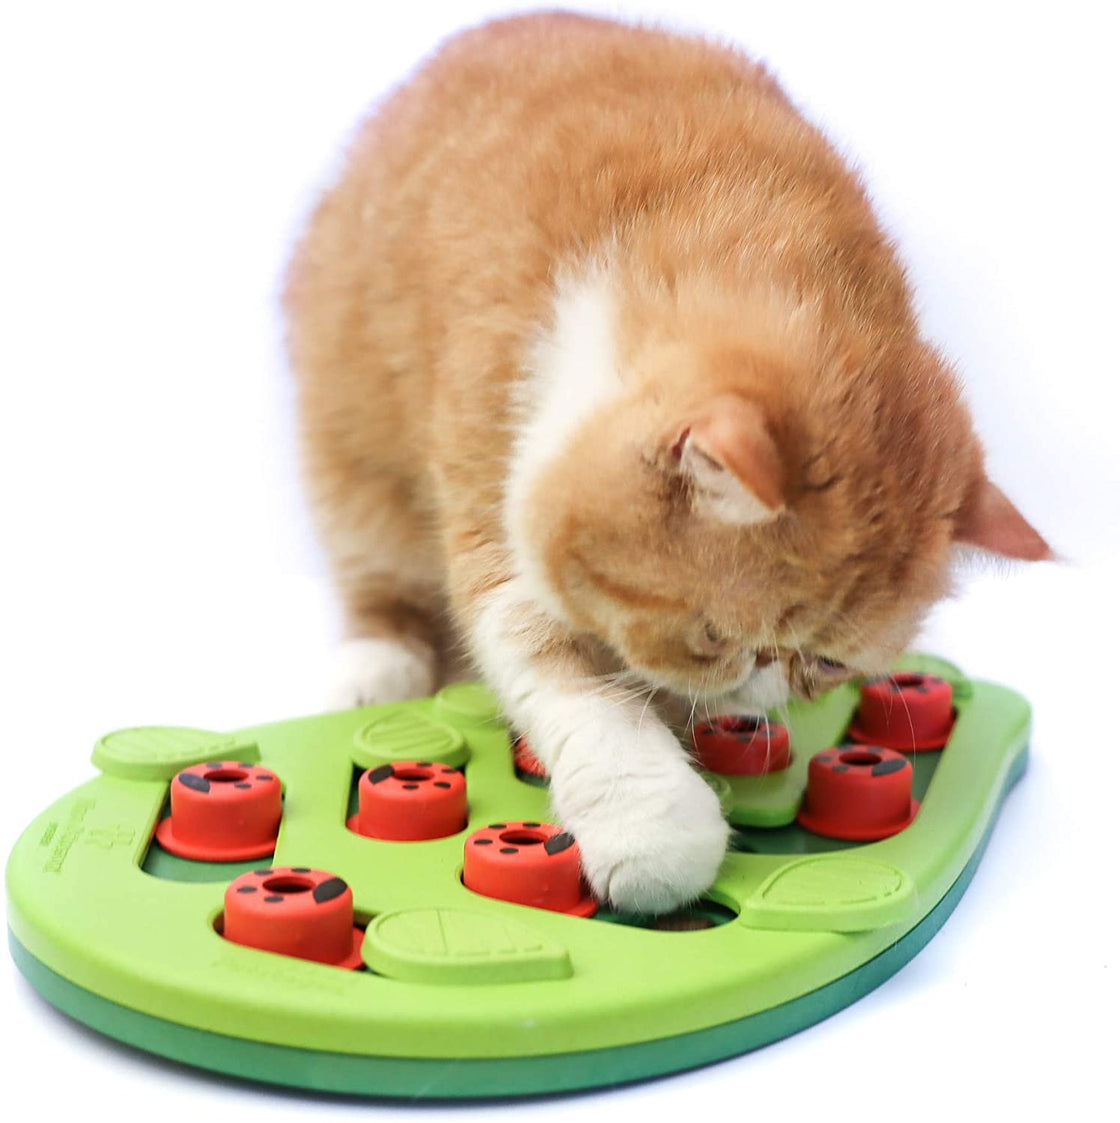 Cat Treats Interactive Cat Puzzles Slow Feeders Creativity Treat Dispensing Toys Relieve Cats' Boredom and Scratch-Resistant Cat Supplies - AlabongCat